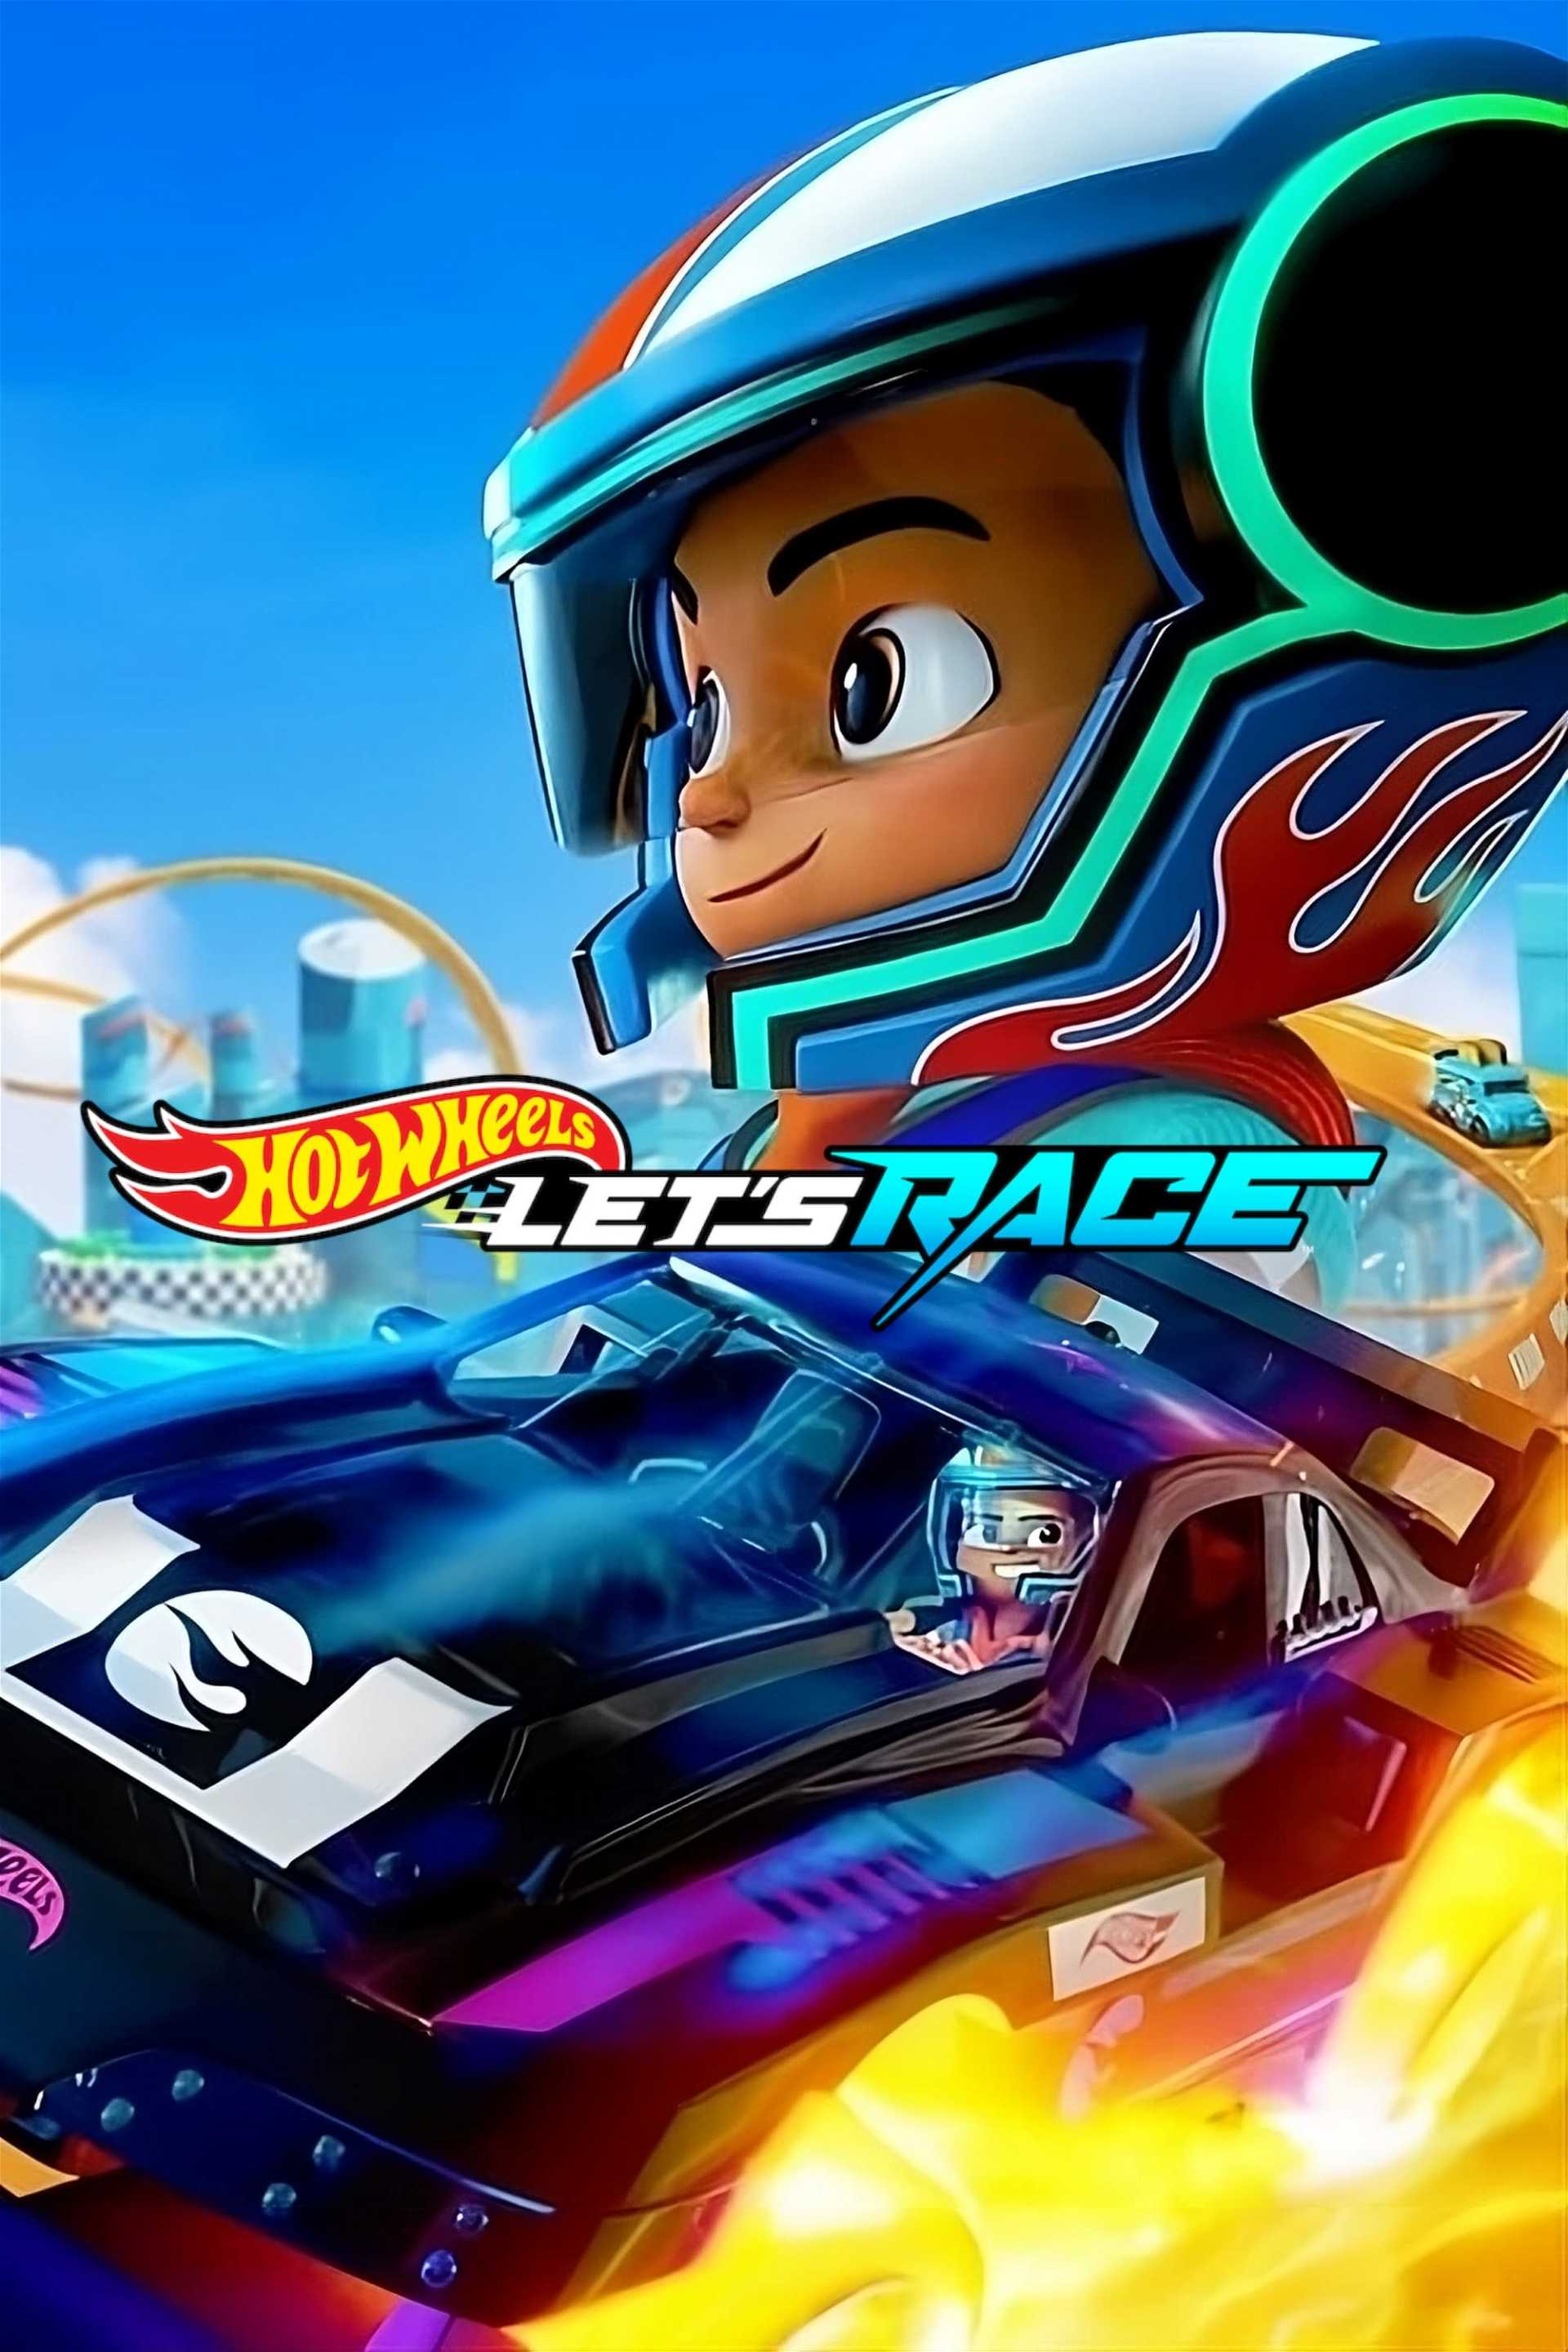 Hot Wheels a tutto gas! in streaming